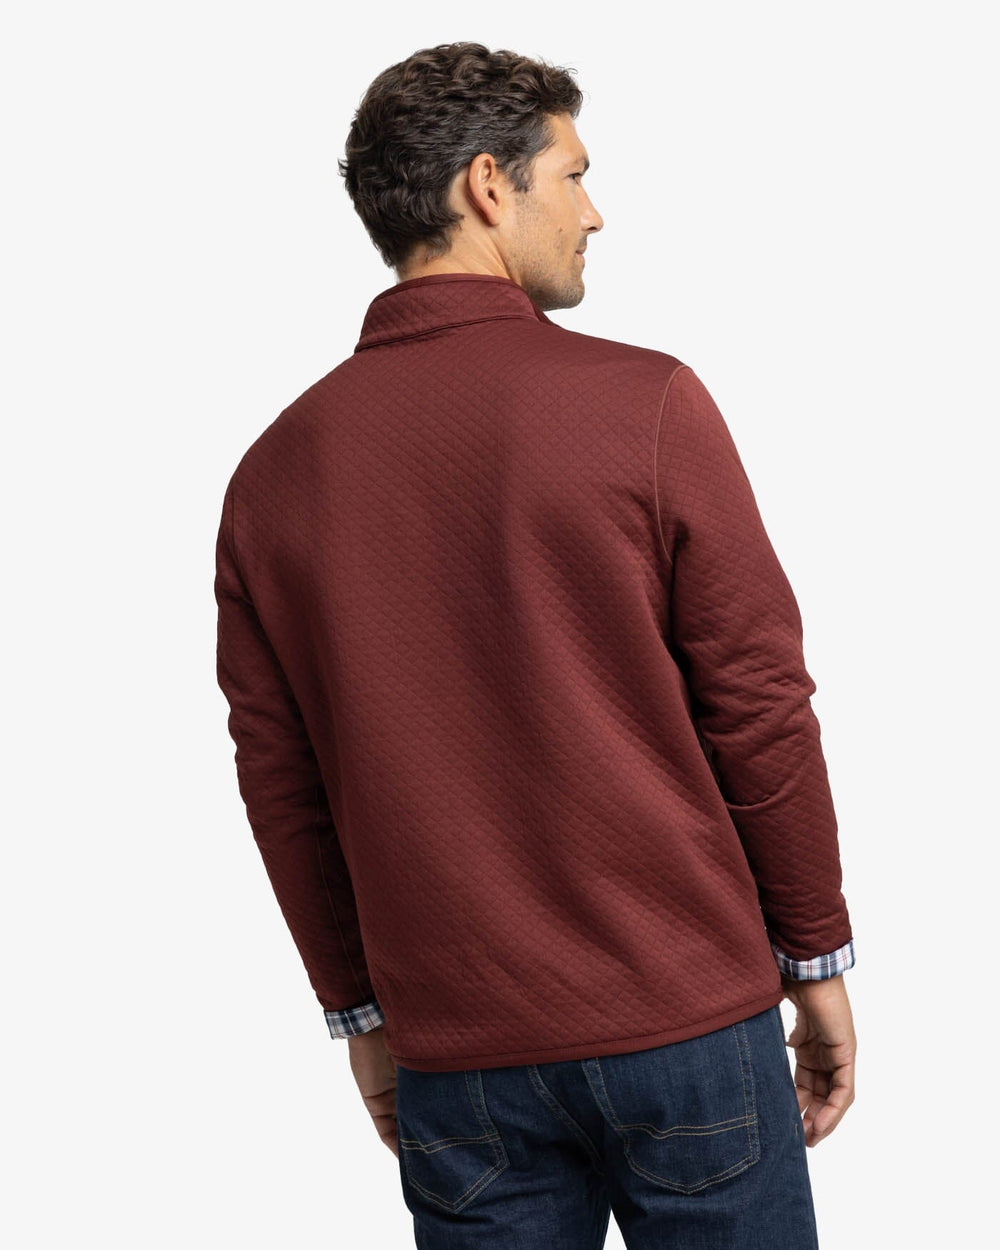 The back view of the Southern Tide Arden Reversible Quarter Zip by Southern Tide - Bordeaux Red